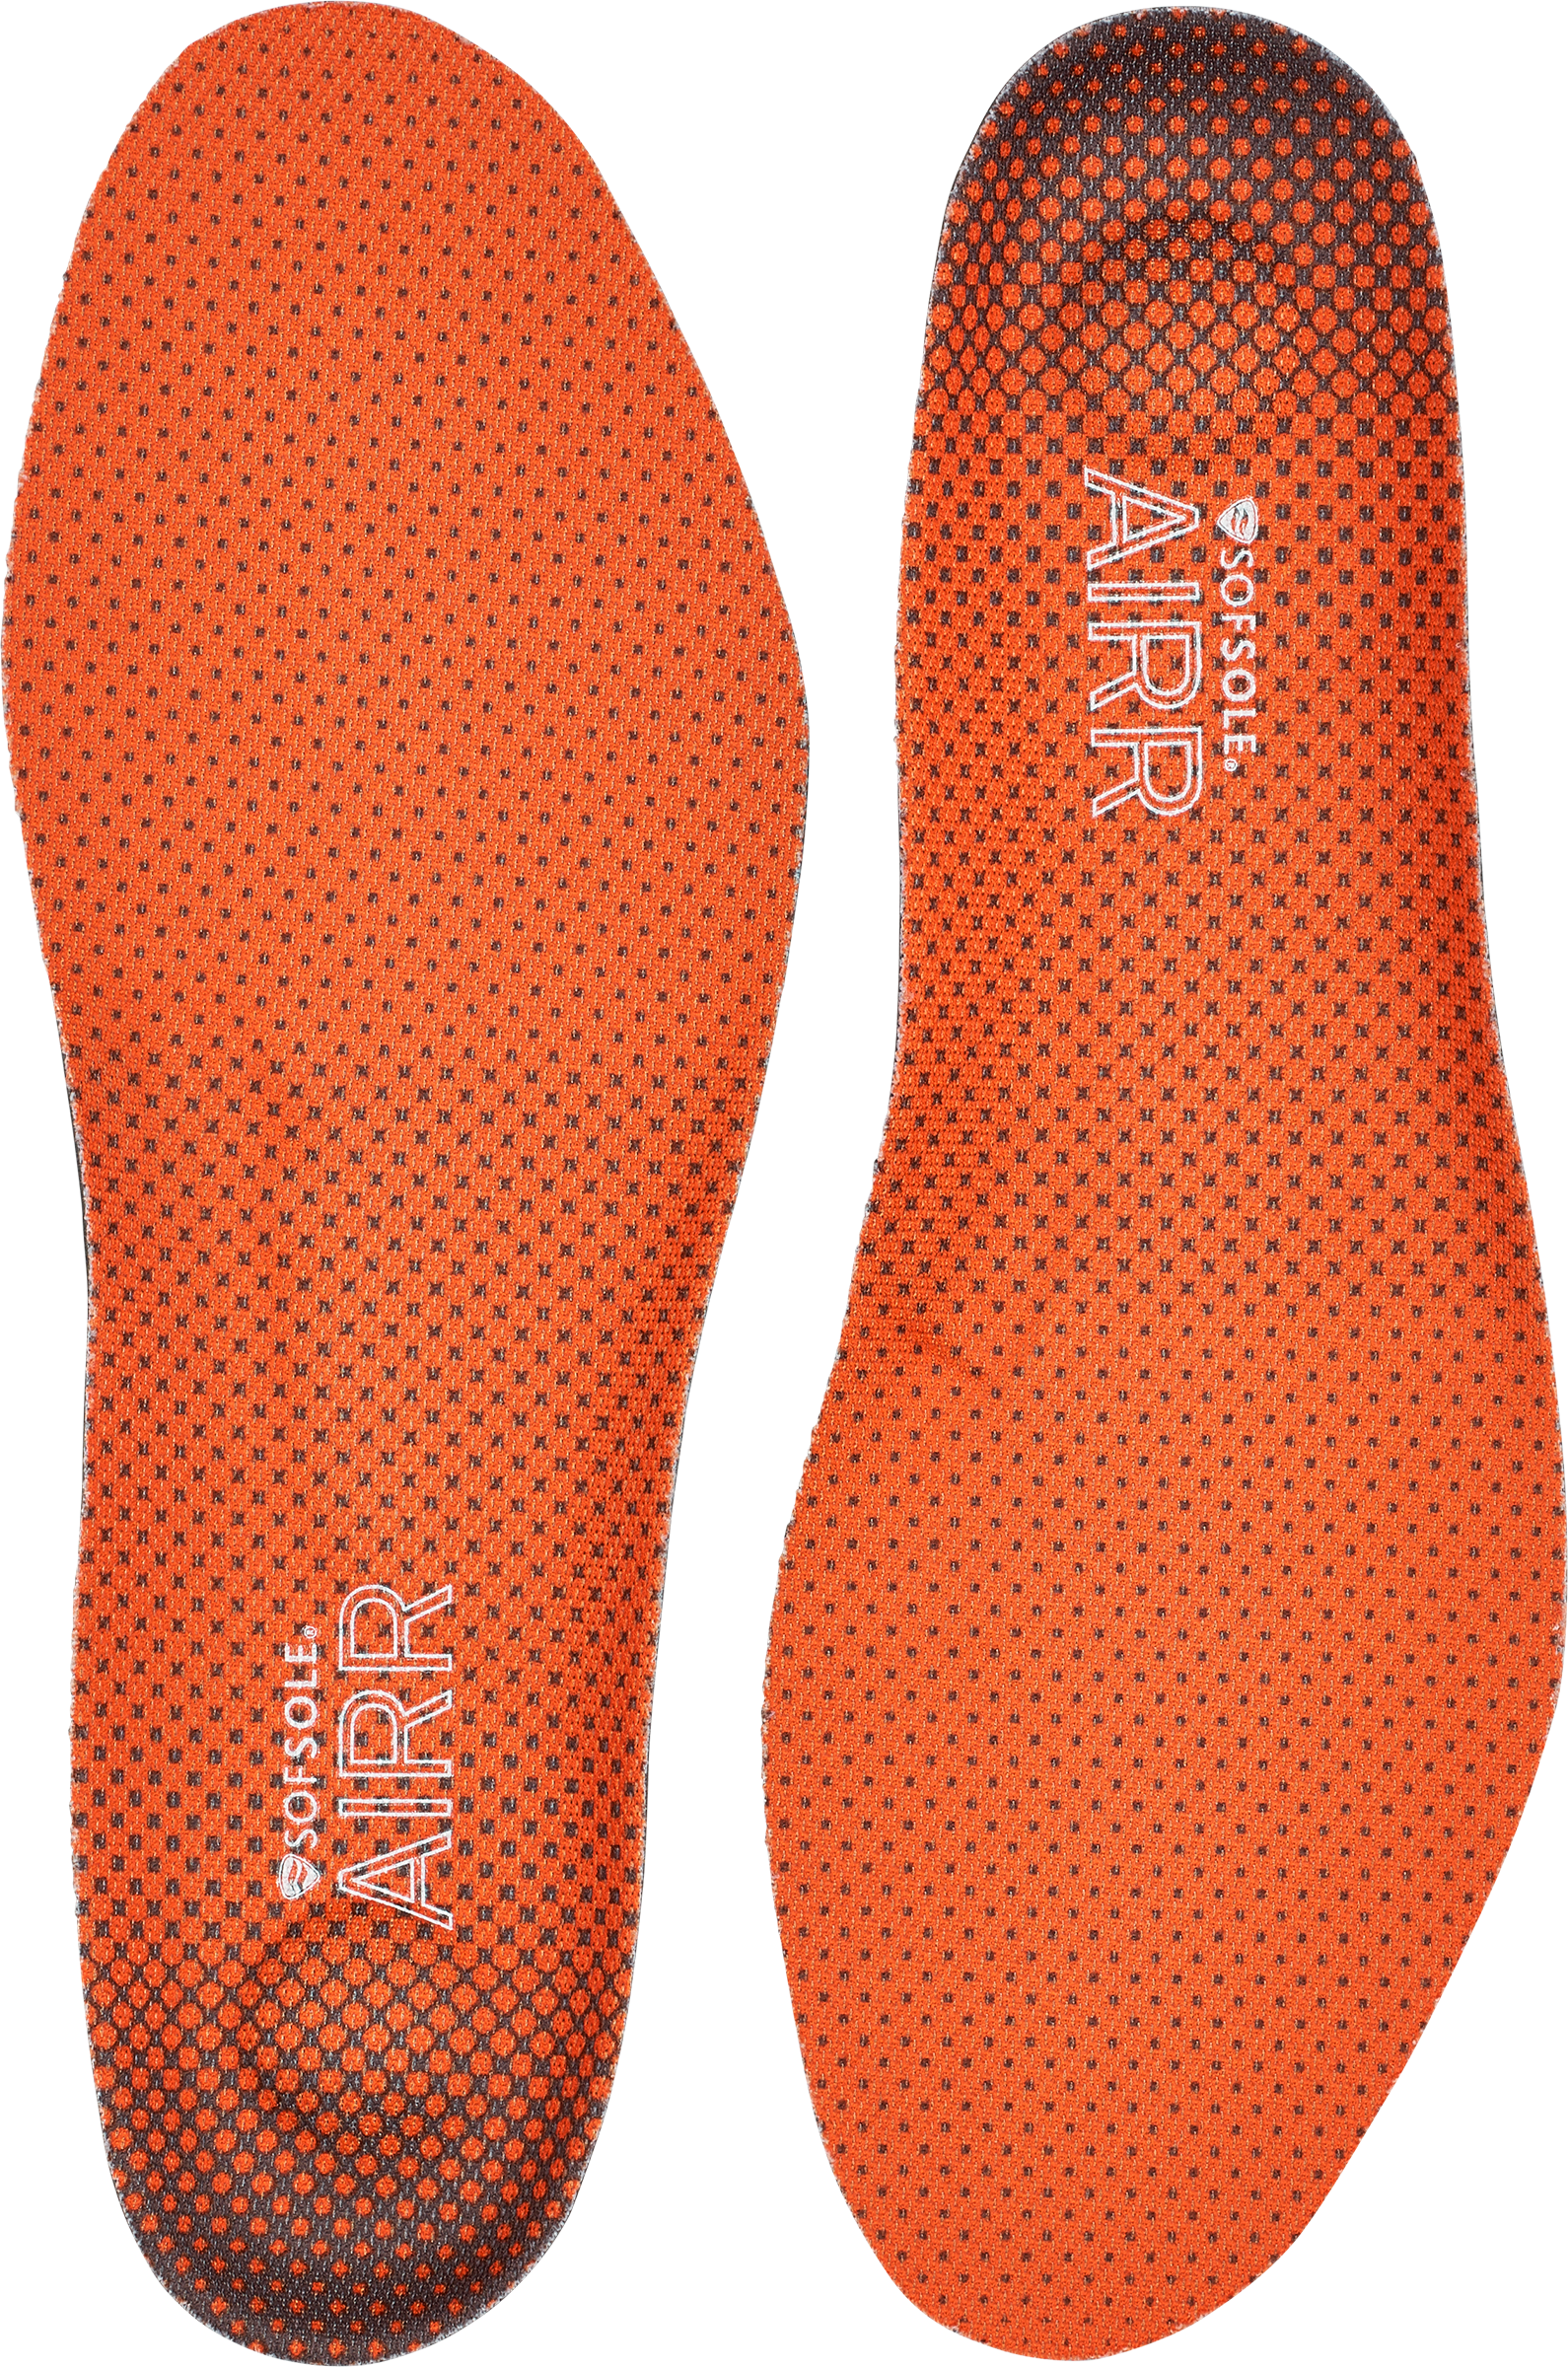 air sole insoles